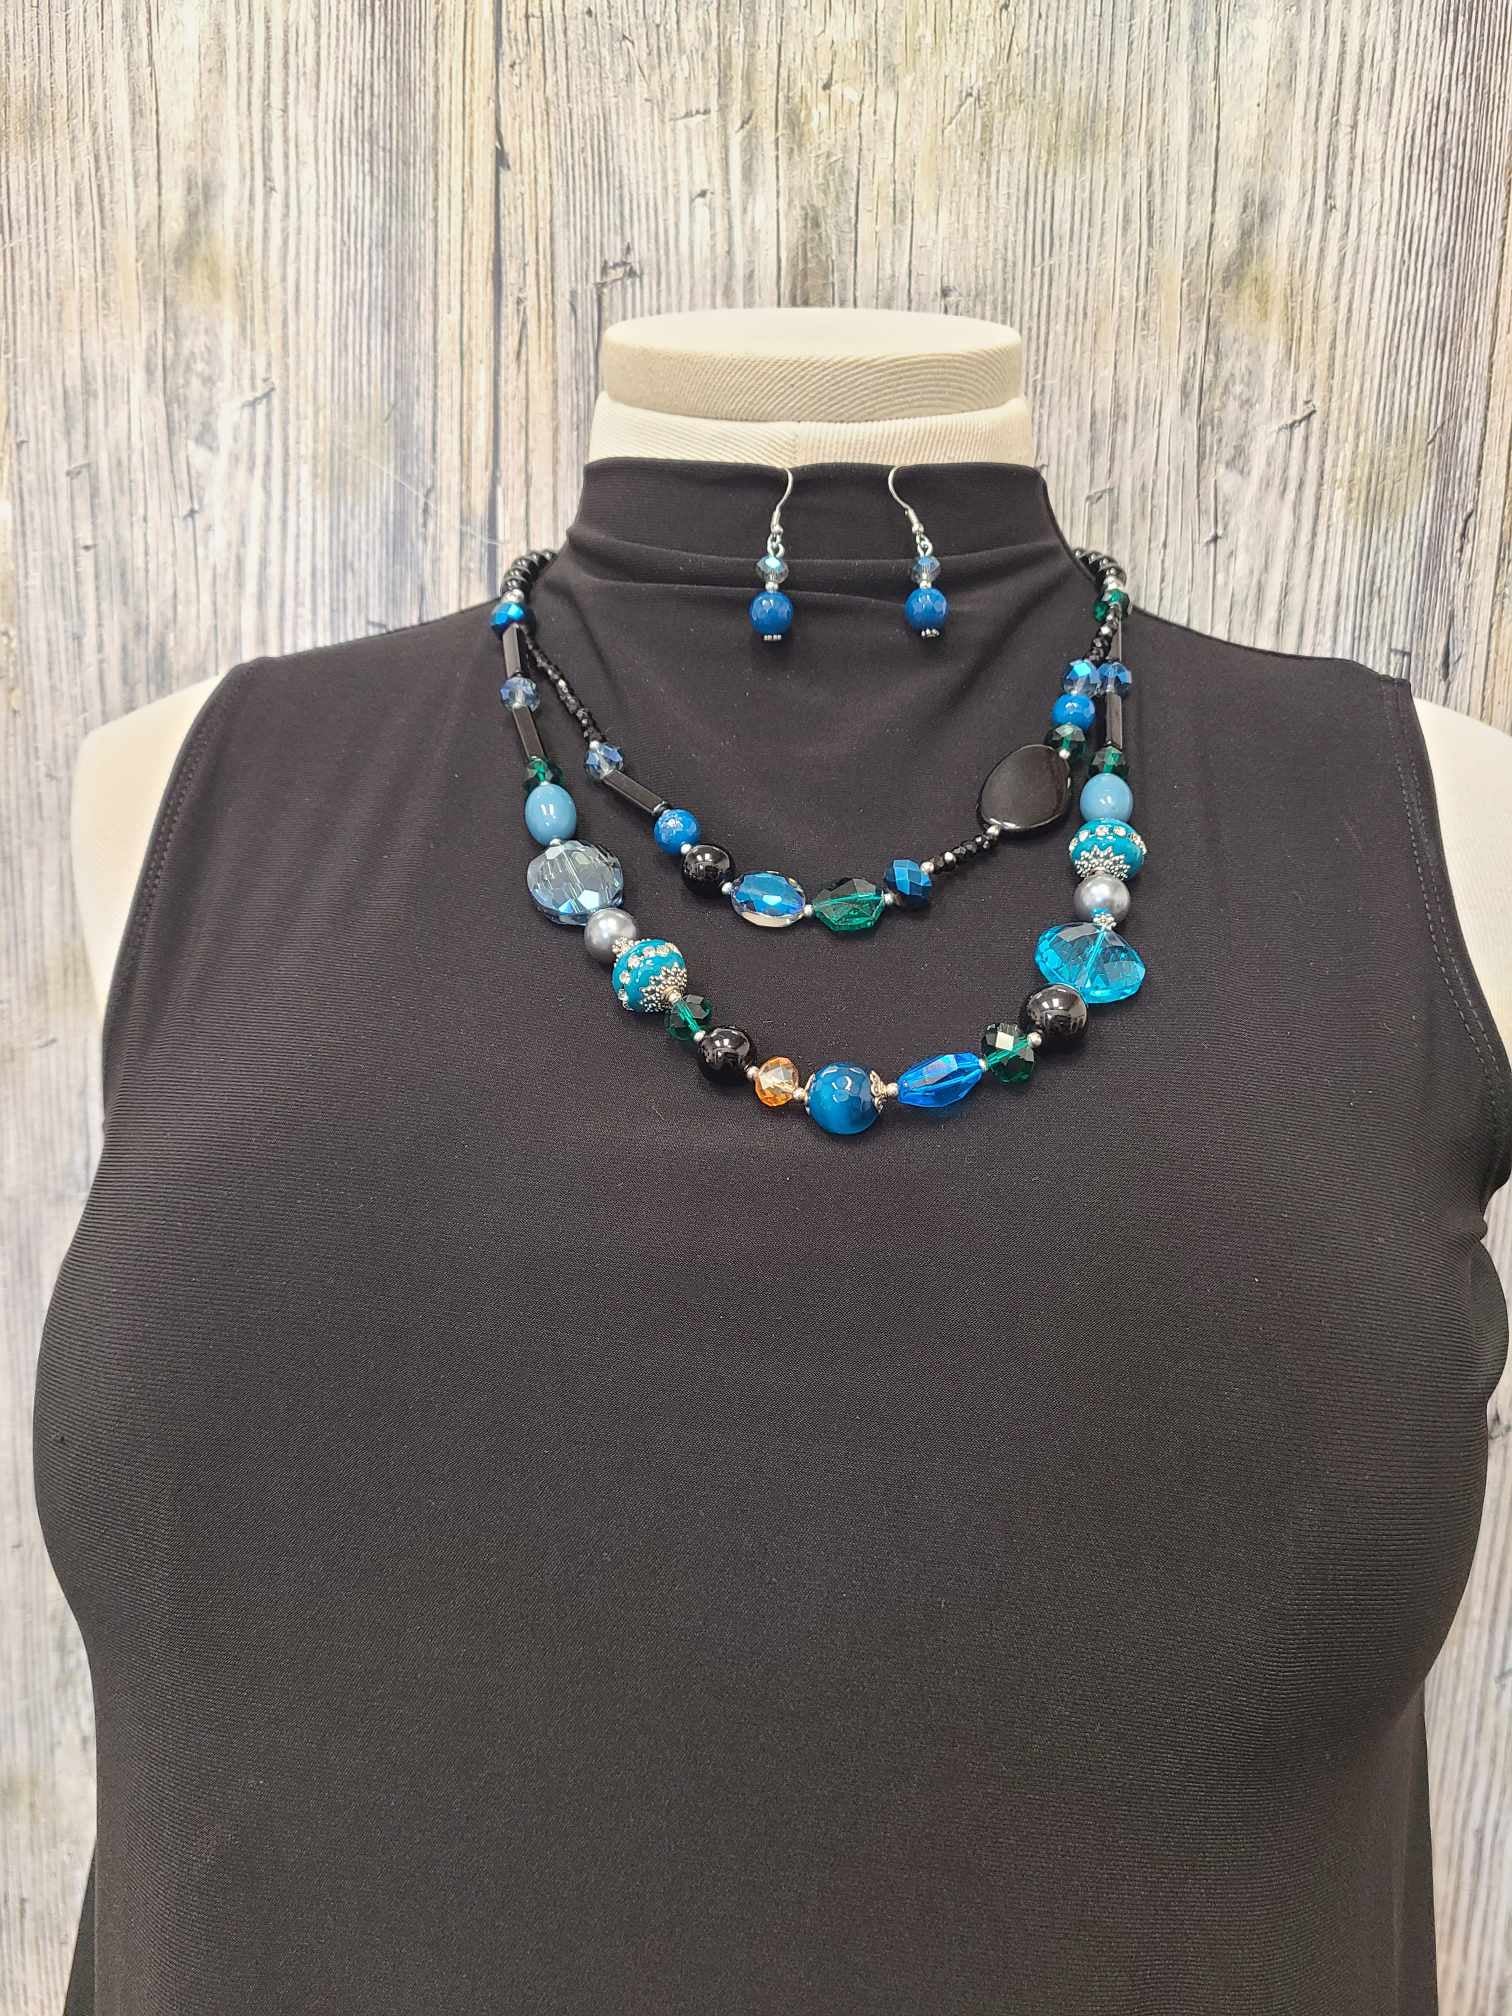 Blue Semi-Precious Stone Necklace with Matching Earrings